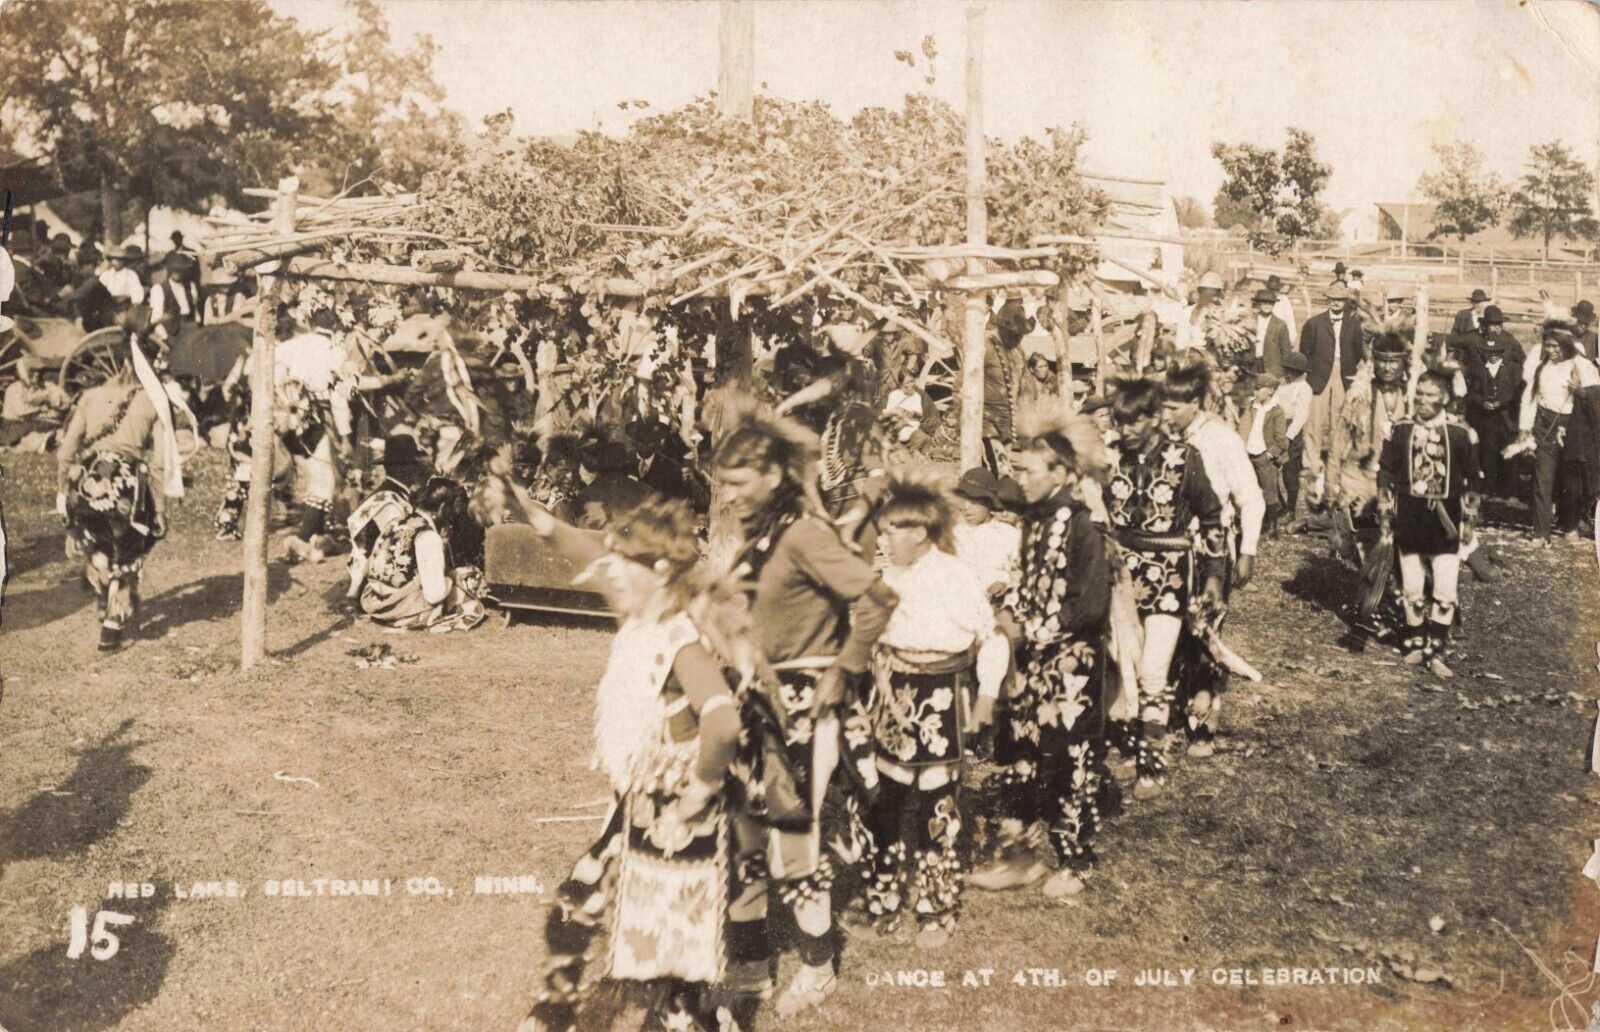 Dance 4th of July Indian Reservation Red Lake Beltrami County Minnesota MN 1908